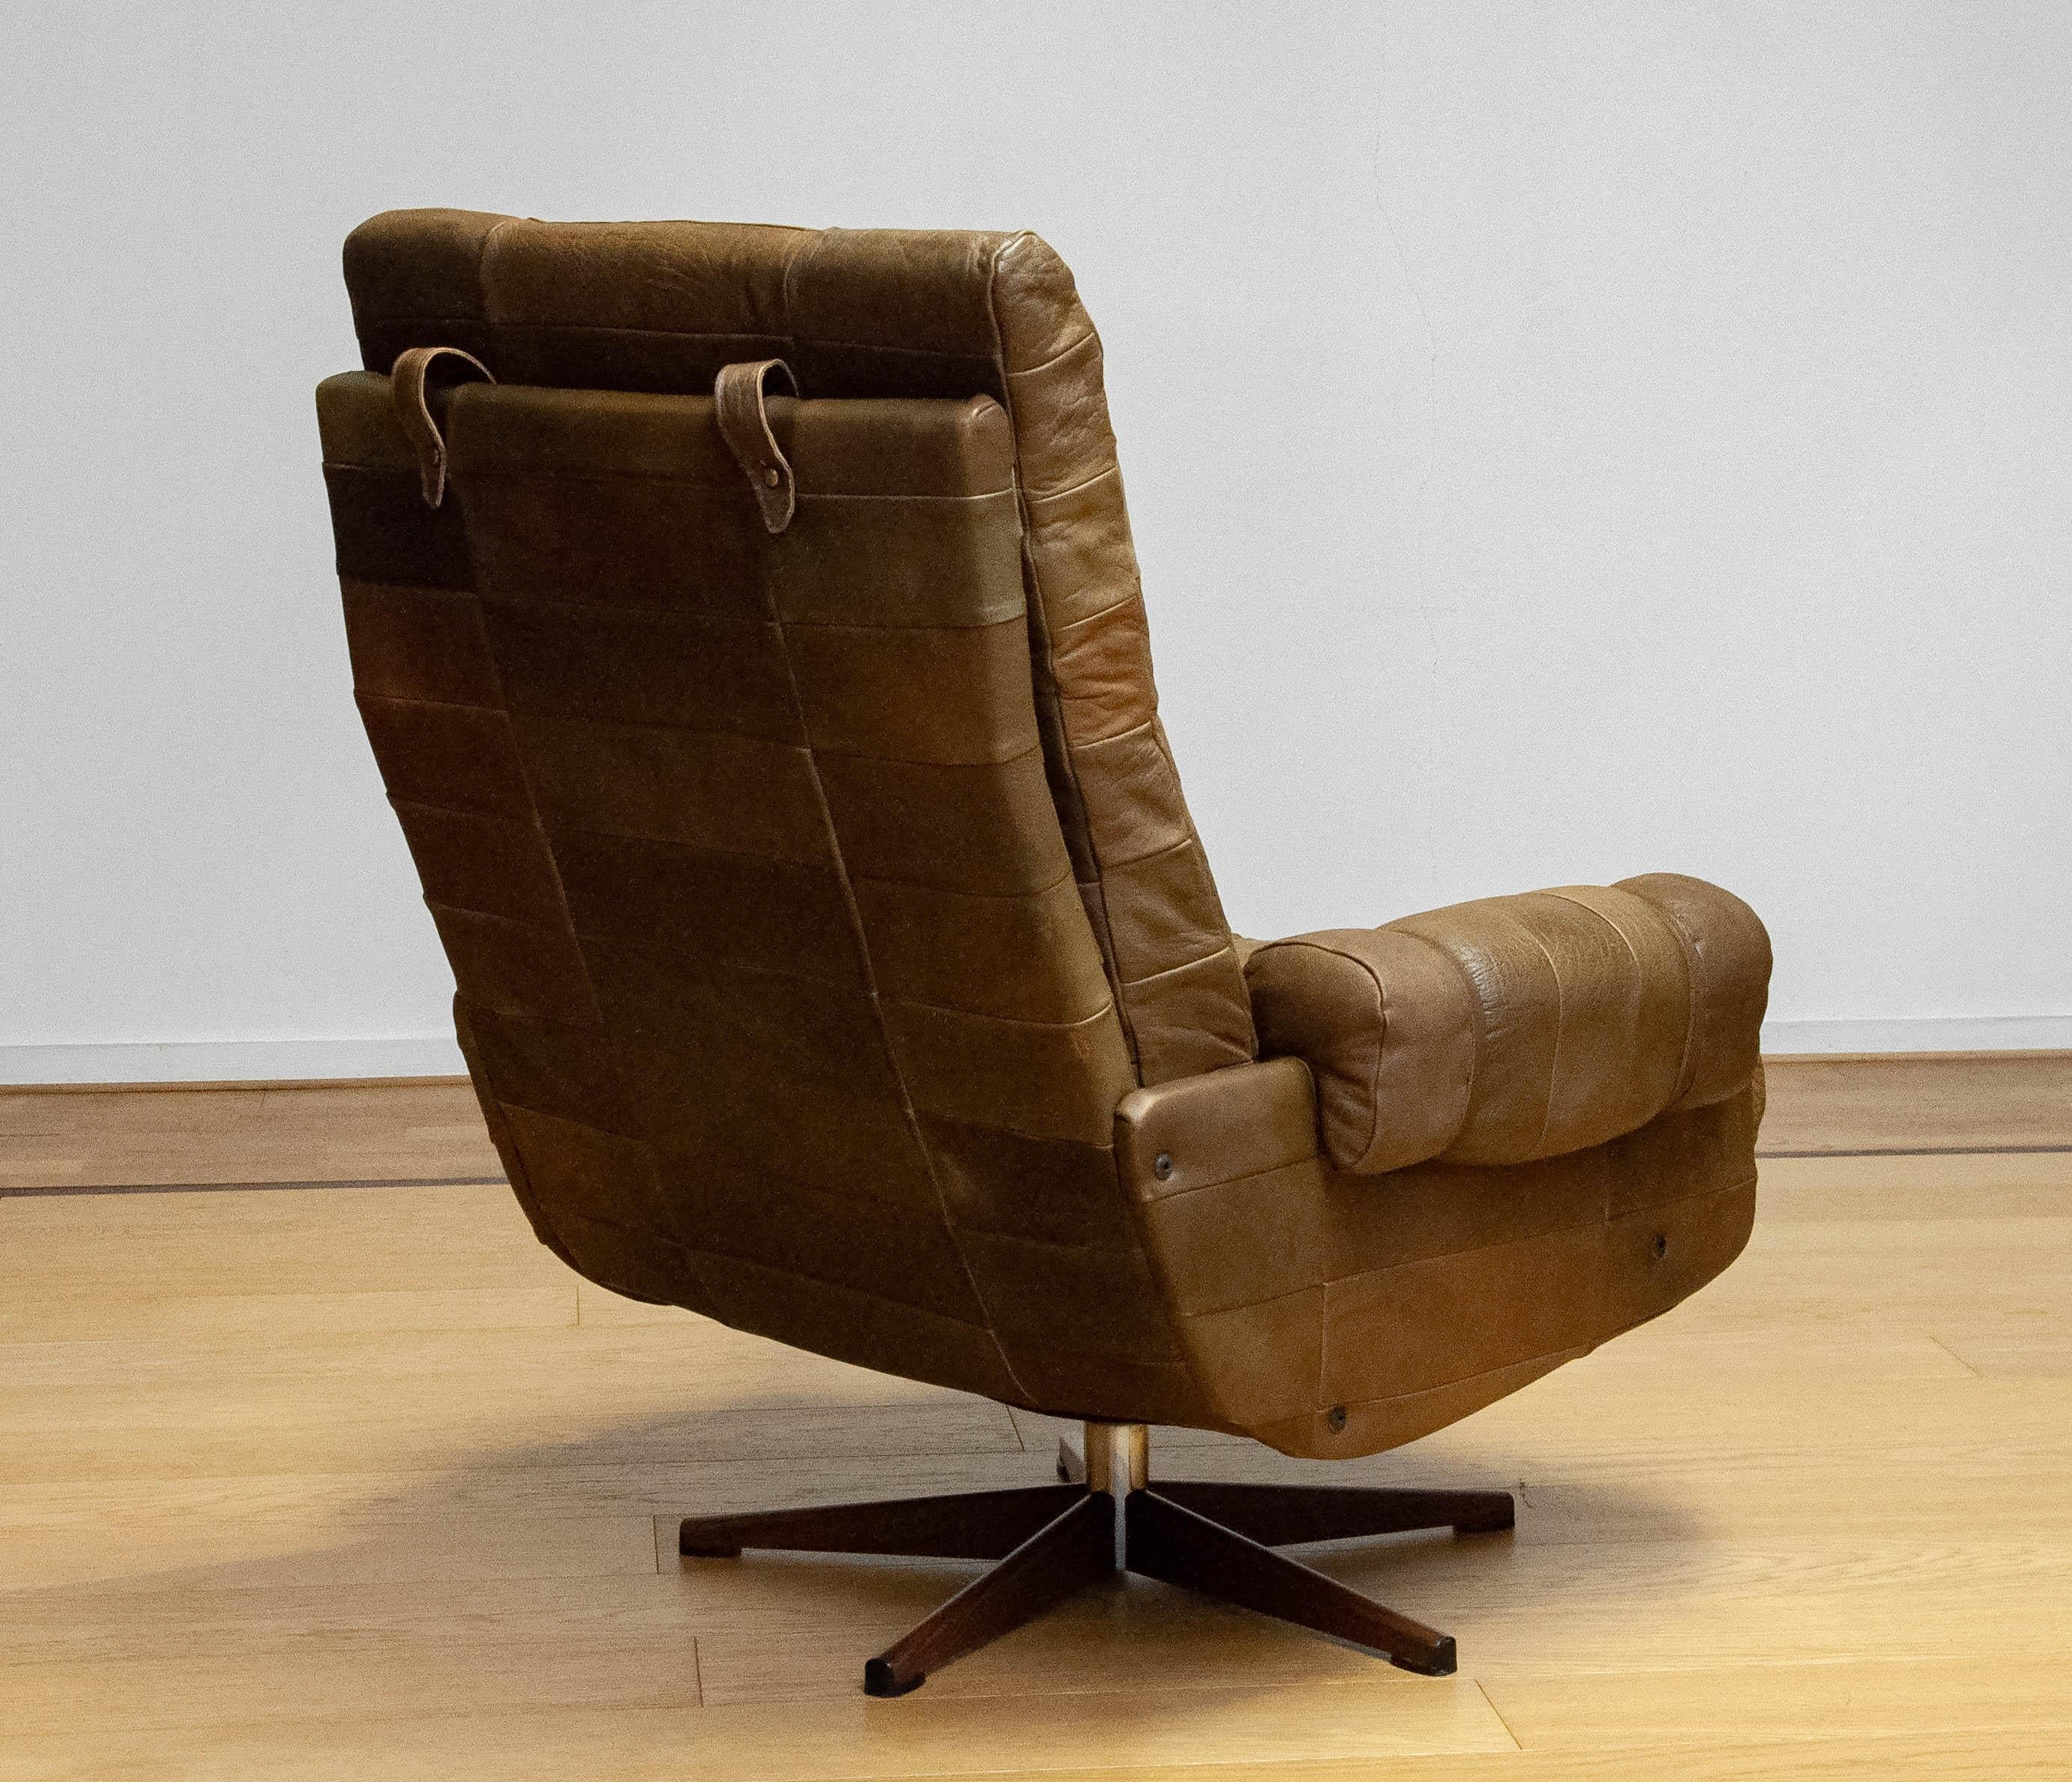 70s Swivel Chair By Arne Norell Möbel AB In Sturdy Olive Green Buffalo Leather In Good Condition In Silvolde, Gelderland